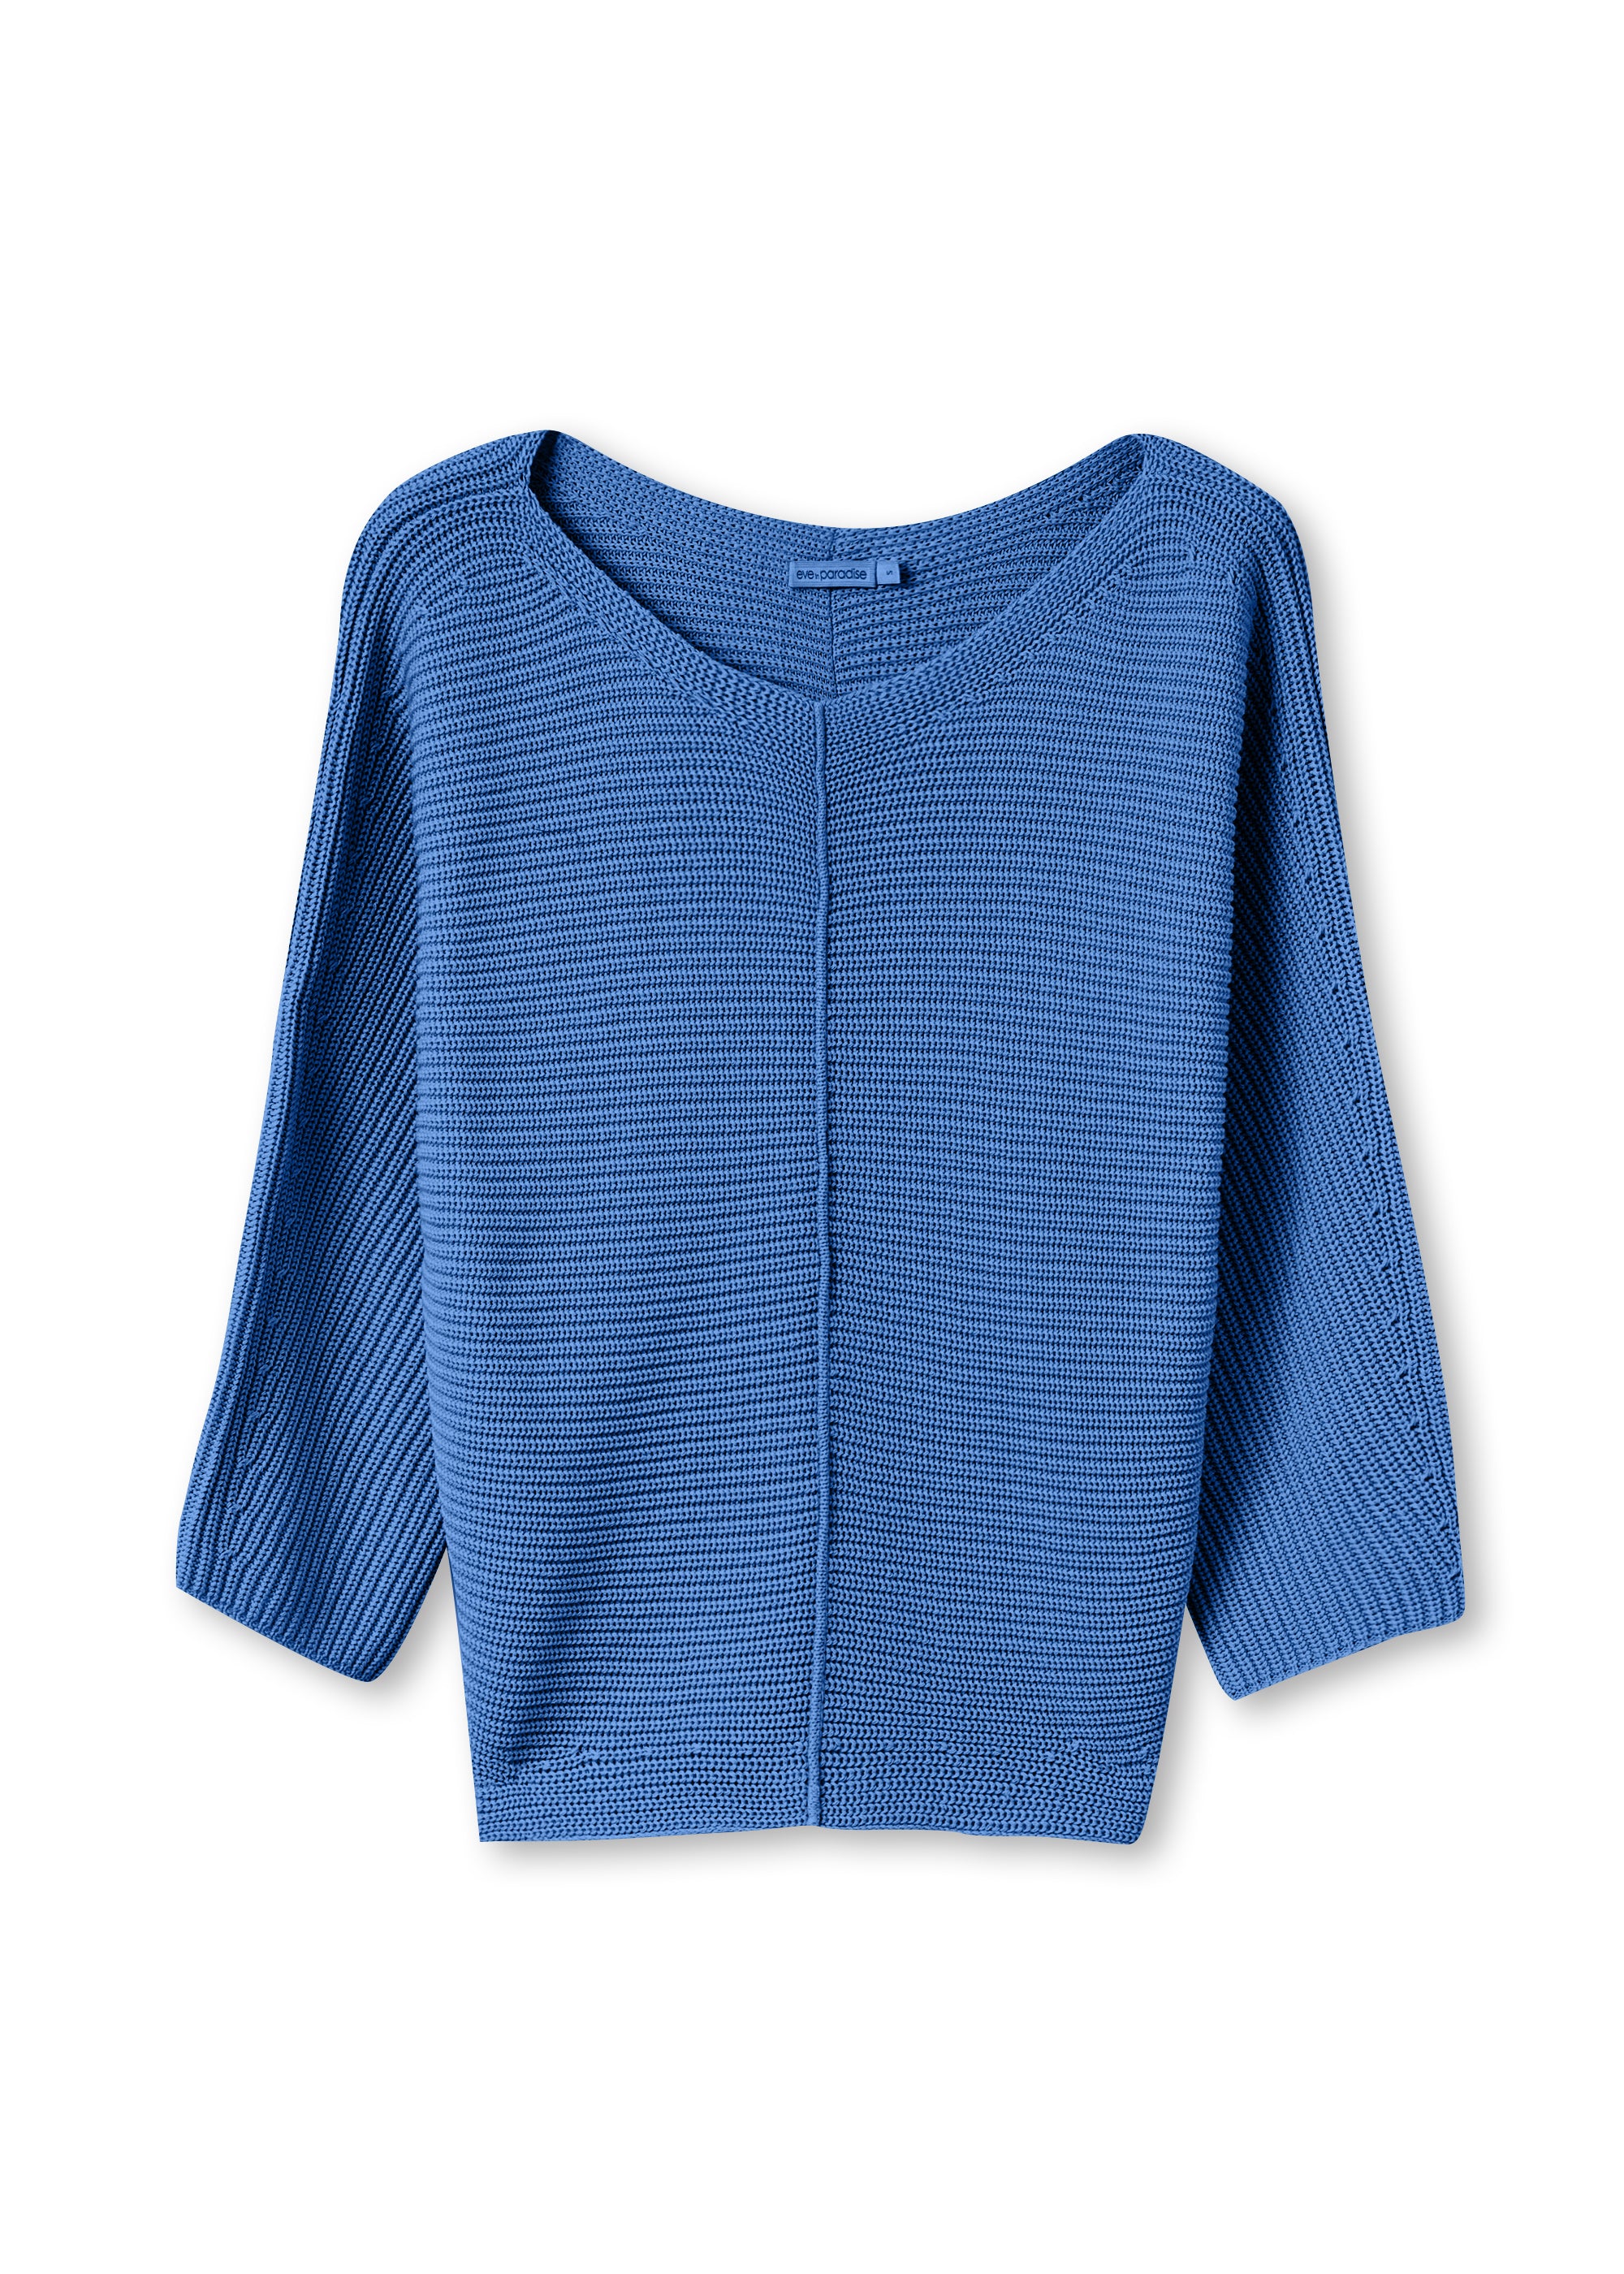 Pullover Modell "Cleo"